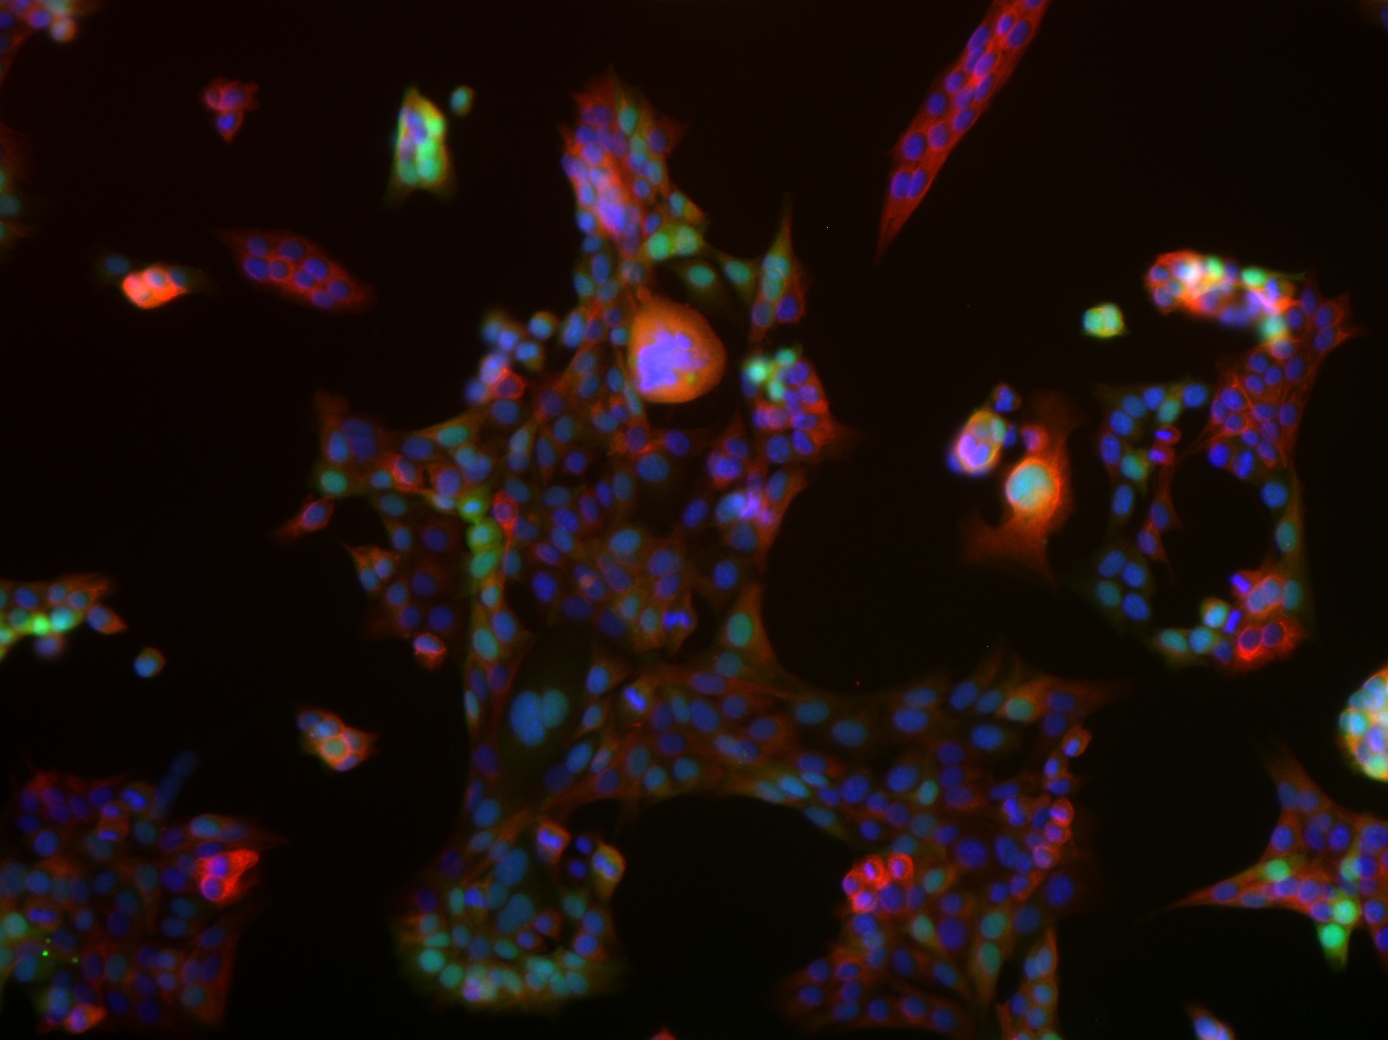 Fluorescence microscopy image of lung cancer cells with green fluorescence protein and immunolabeling for keratin 8 in red